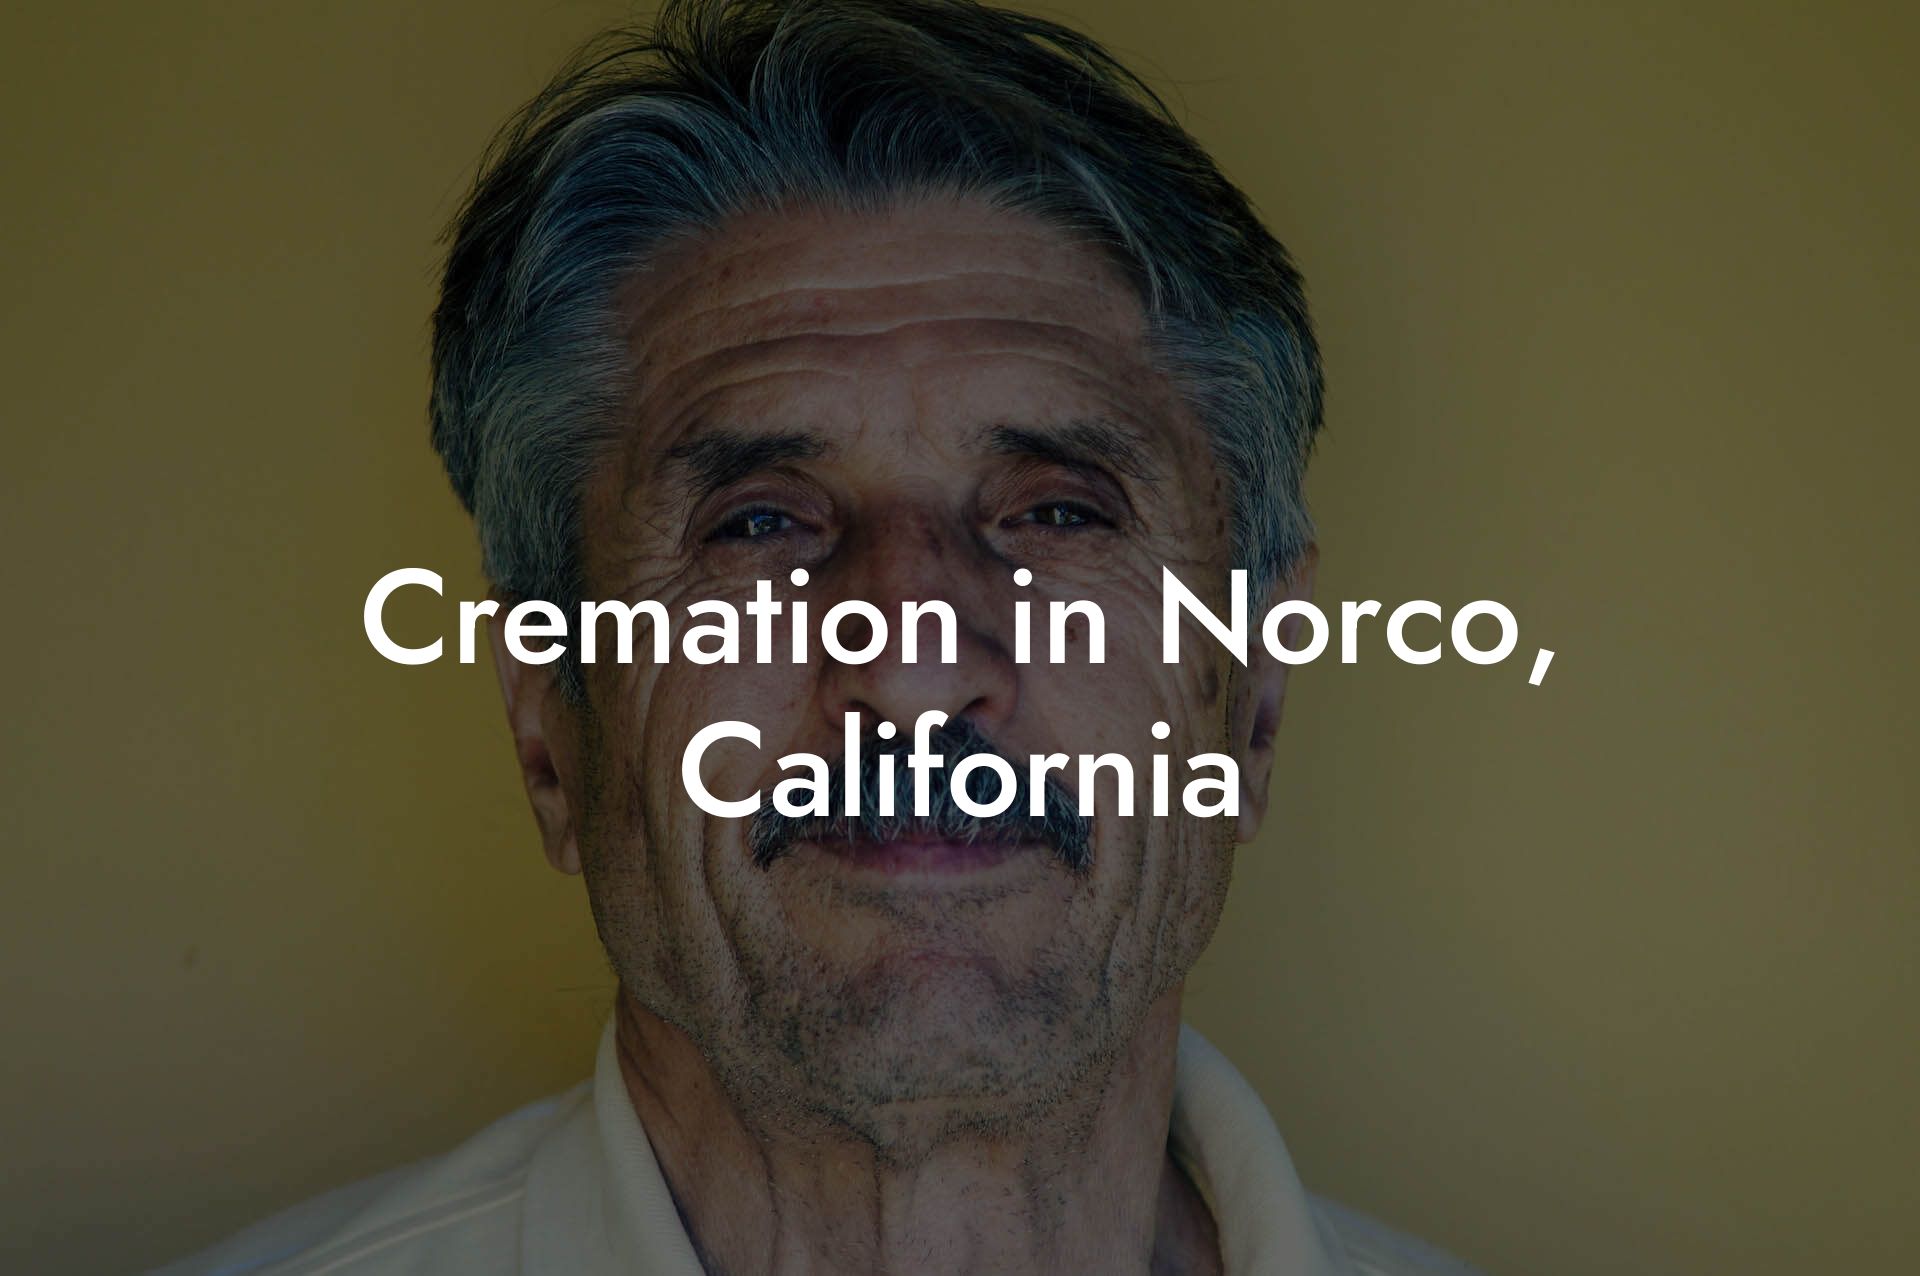 Cremation in Norco, California